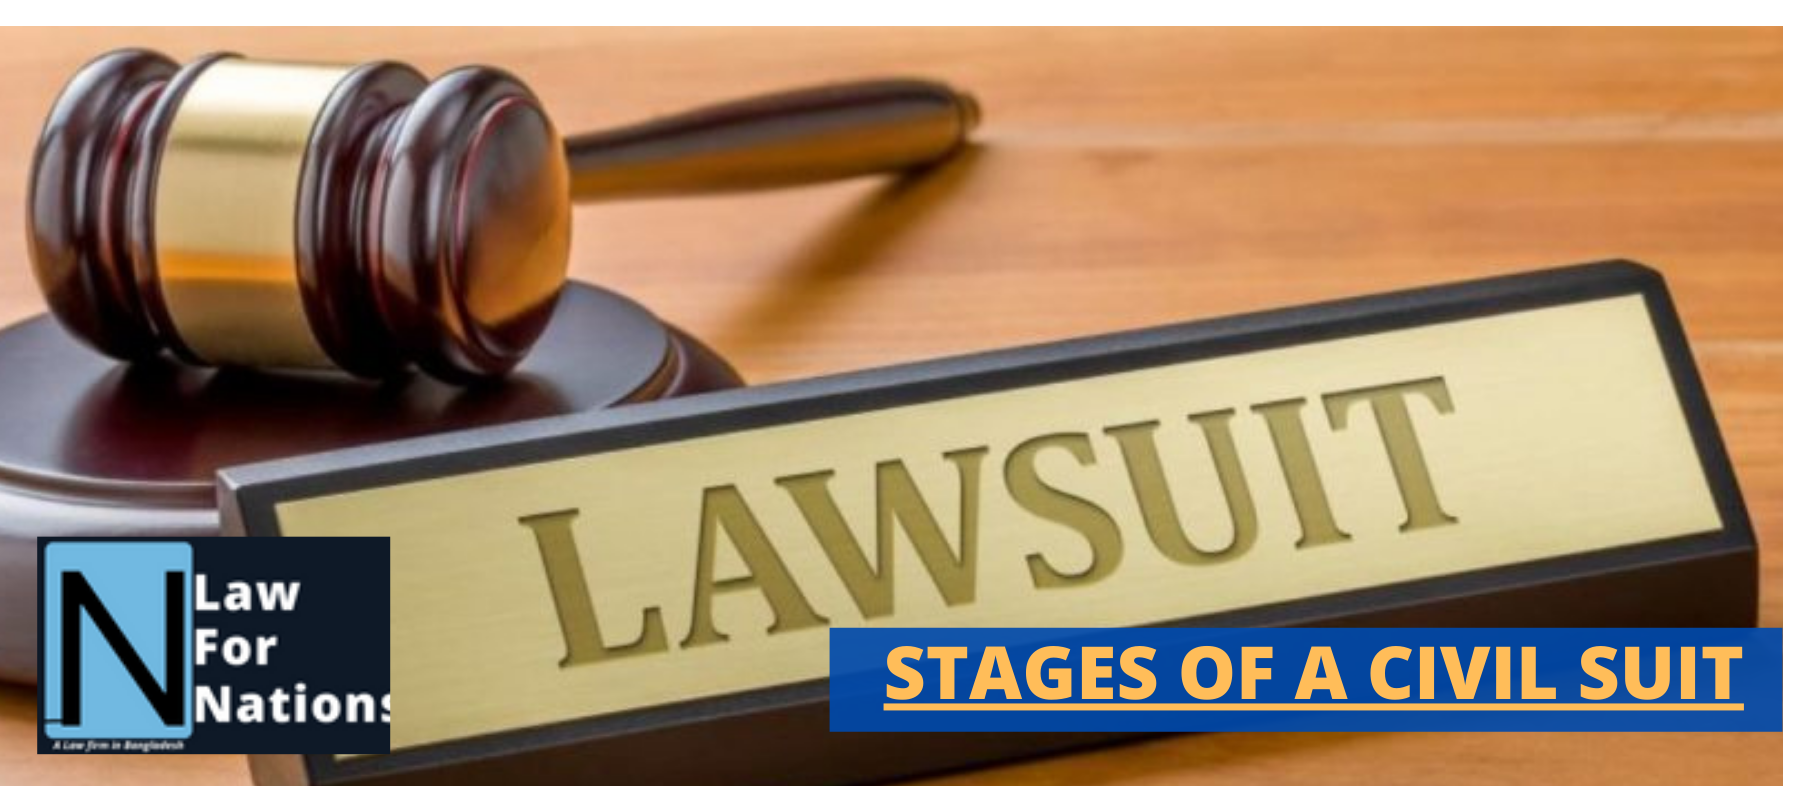 STAGES OF A CIVIL SUIT